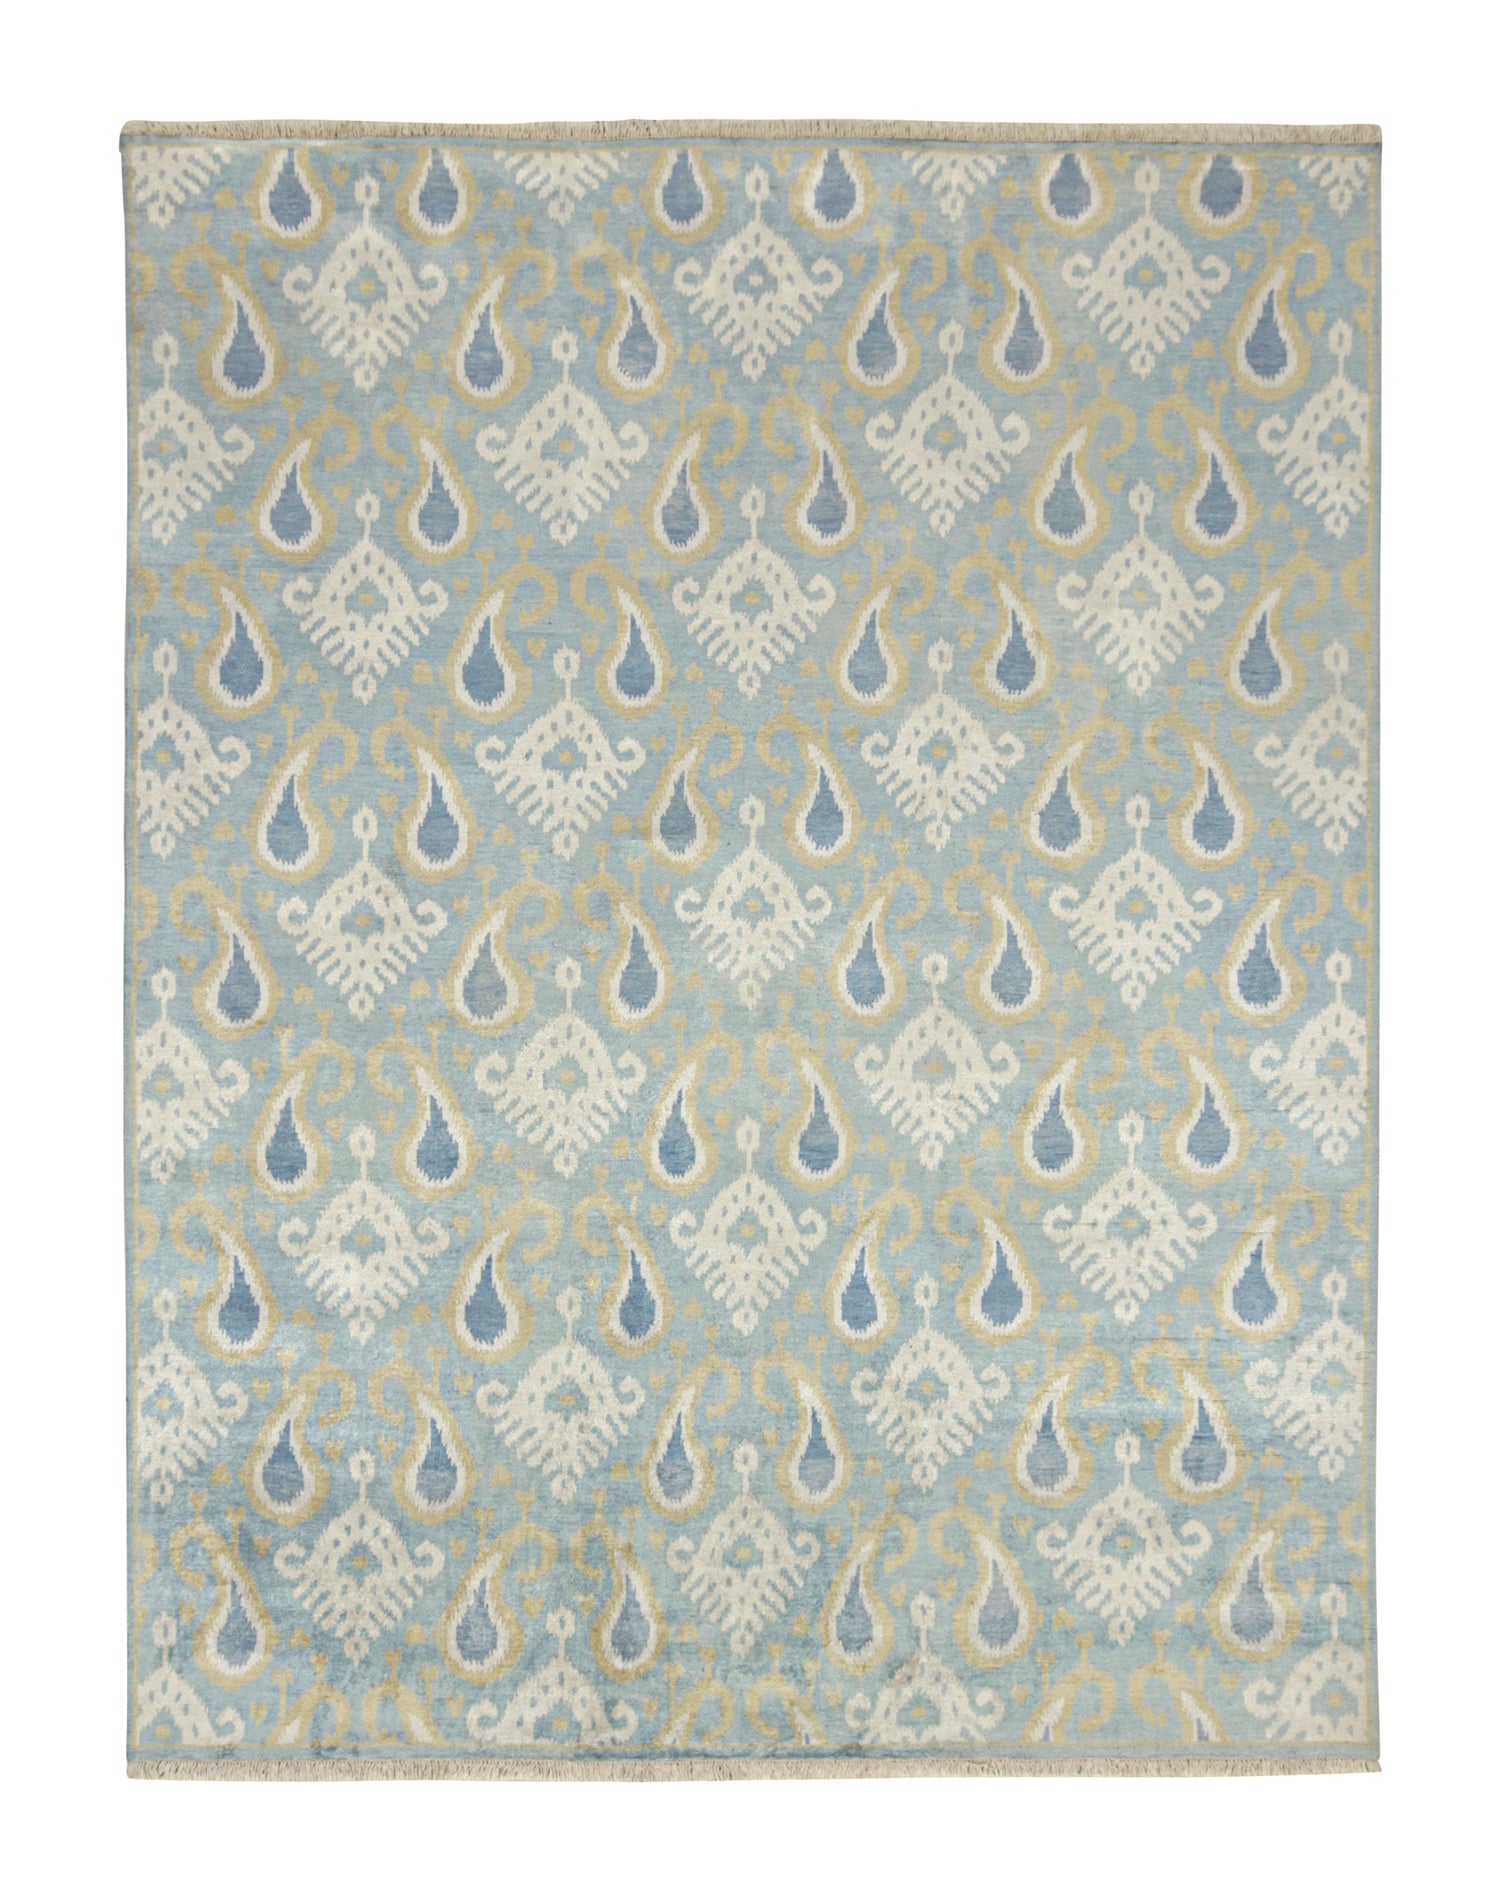 Rug & Kilim’s Classic Ikats Style Rug with Gold, White and Blue Patterns For Sale